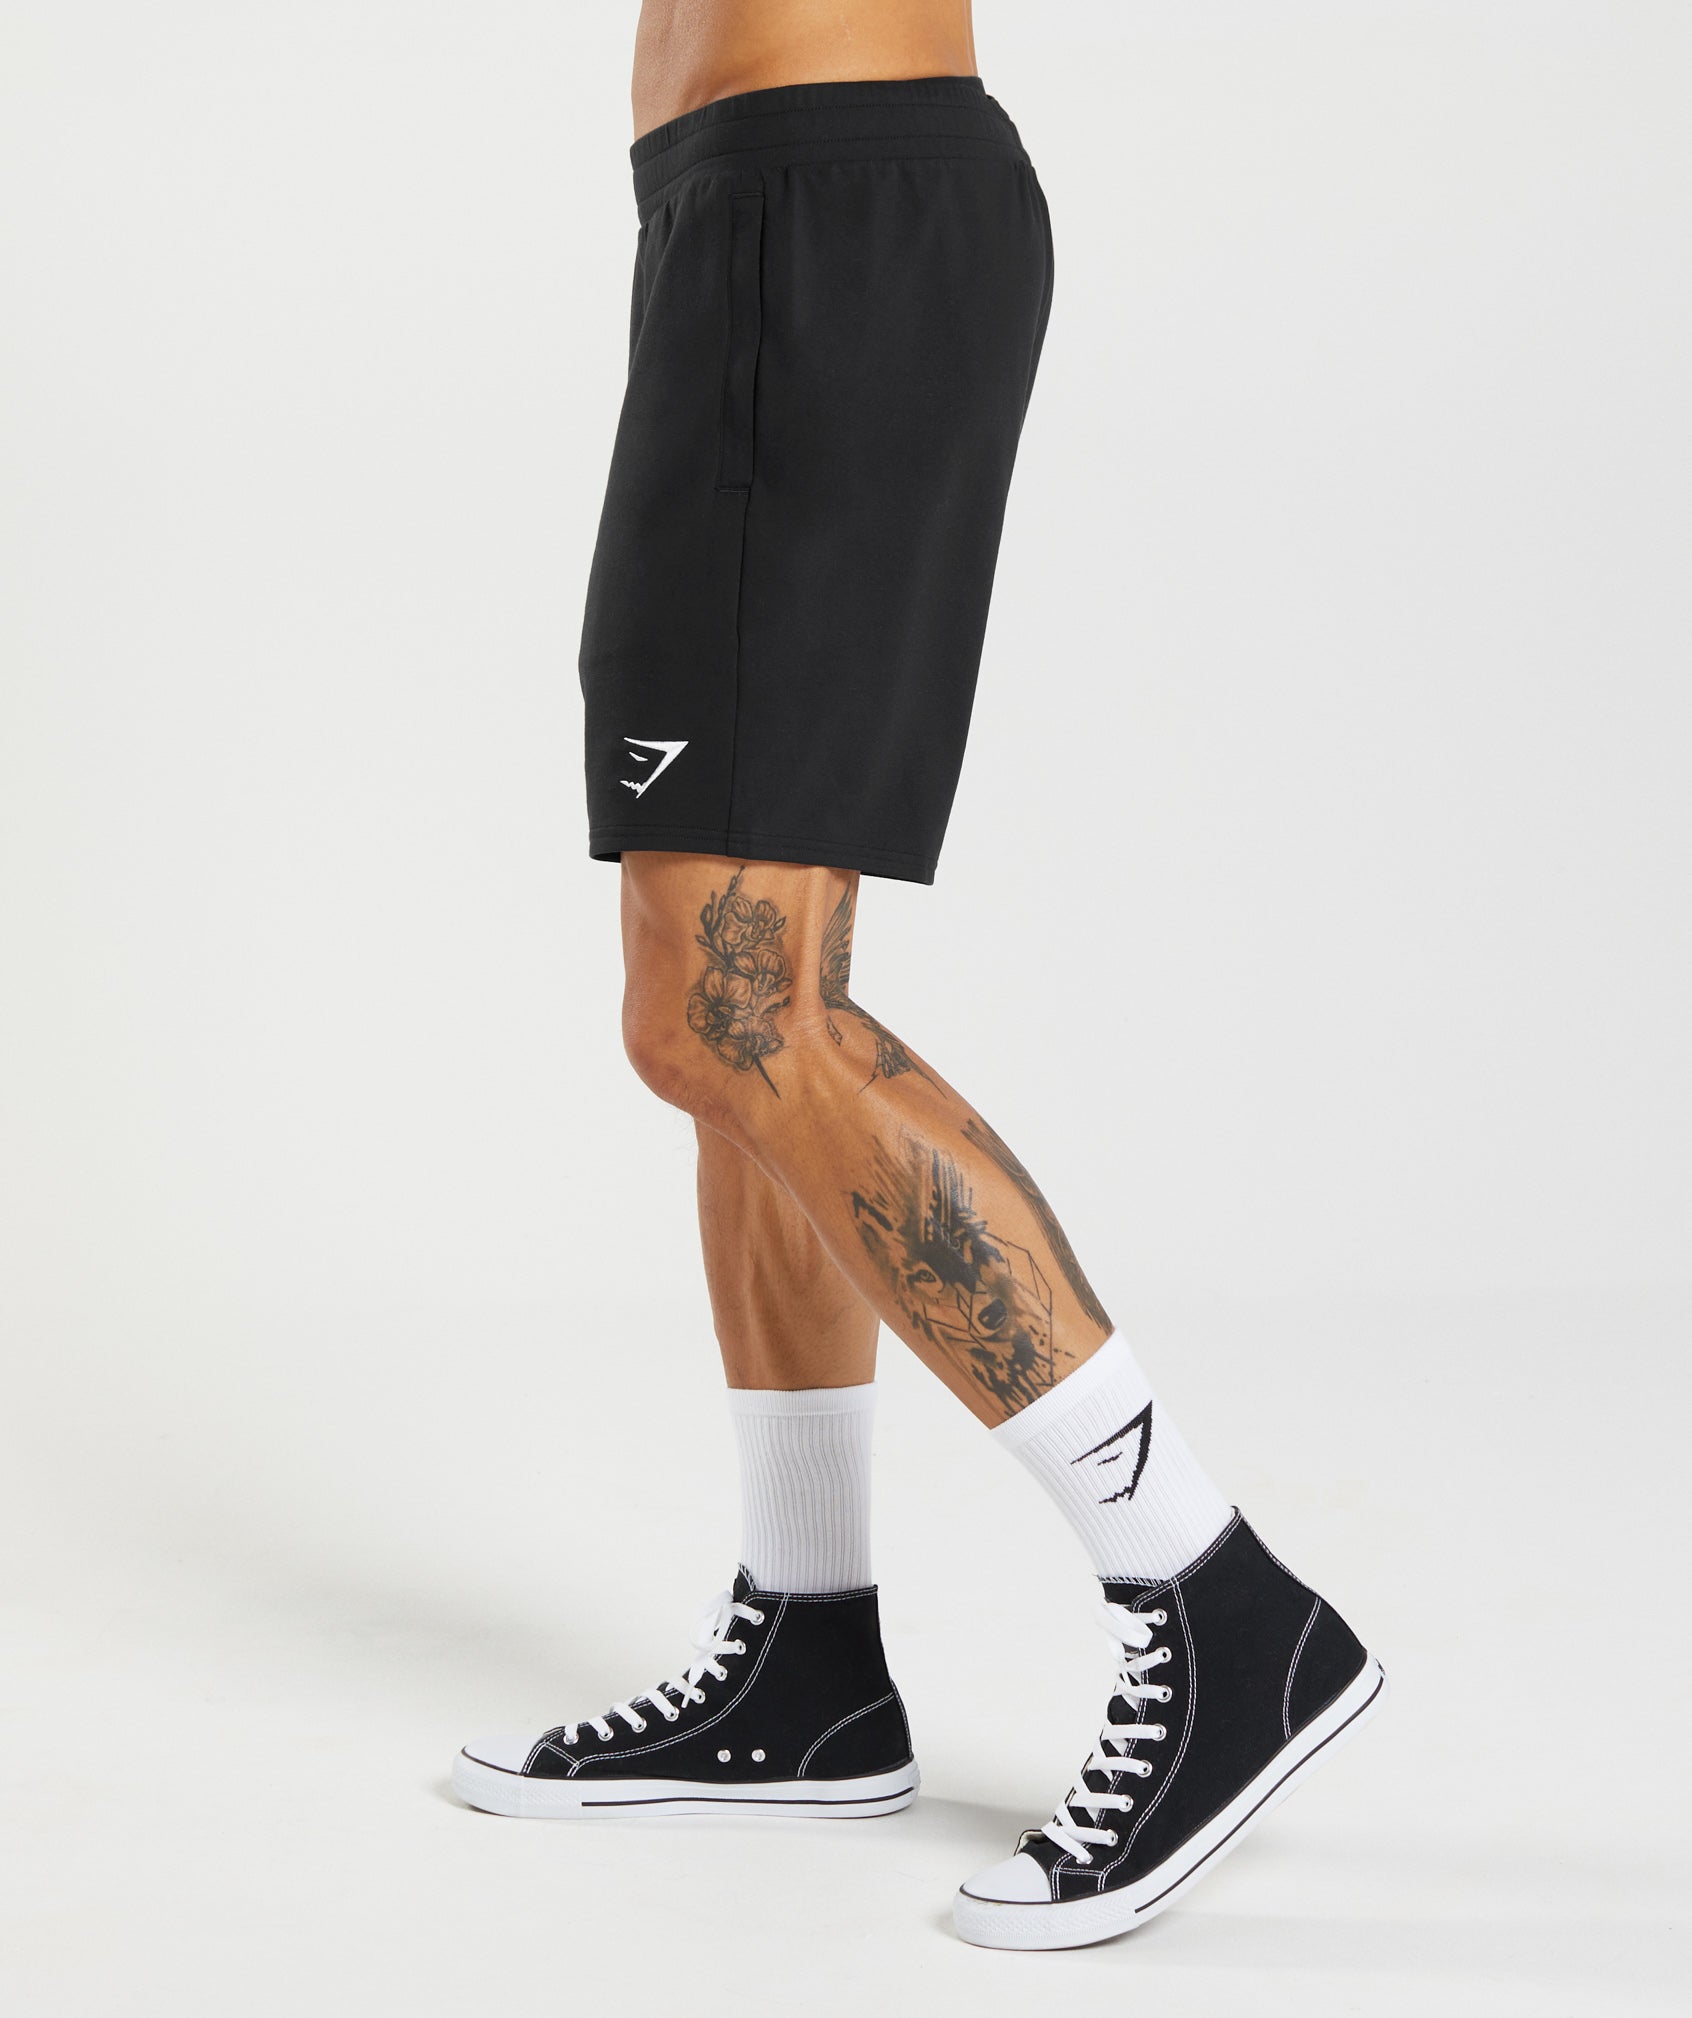 Critical 7" Shorts in Black - view 2